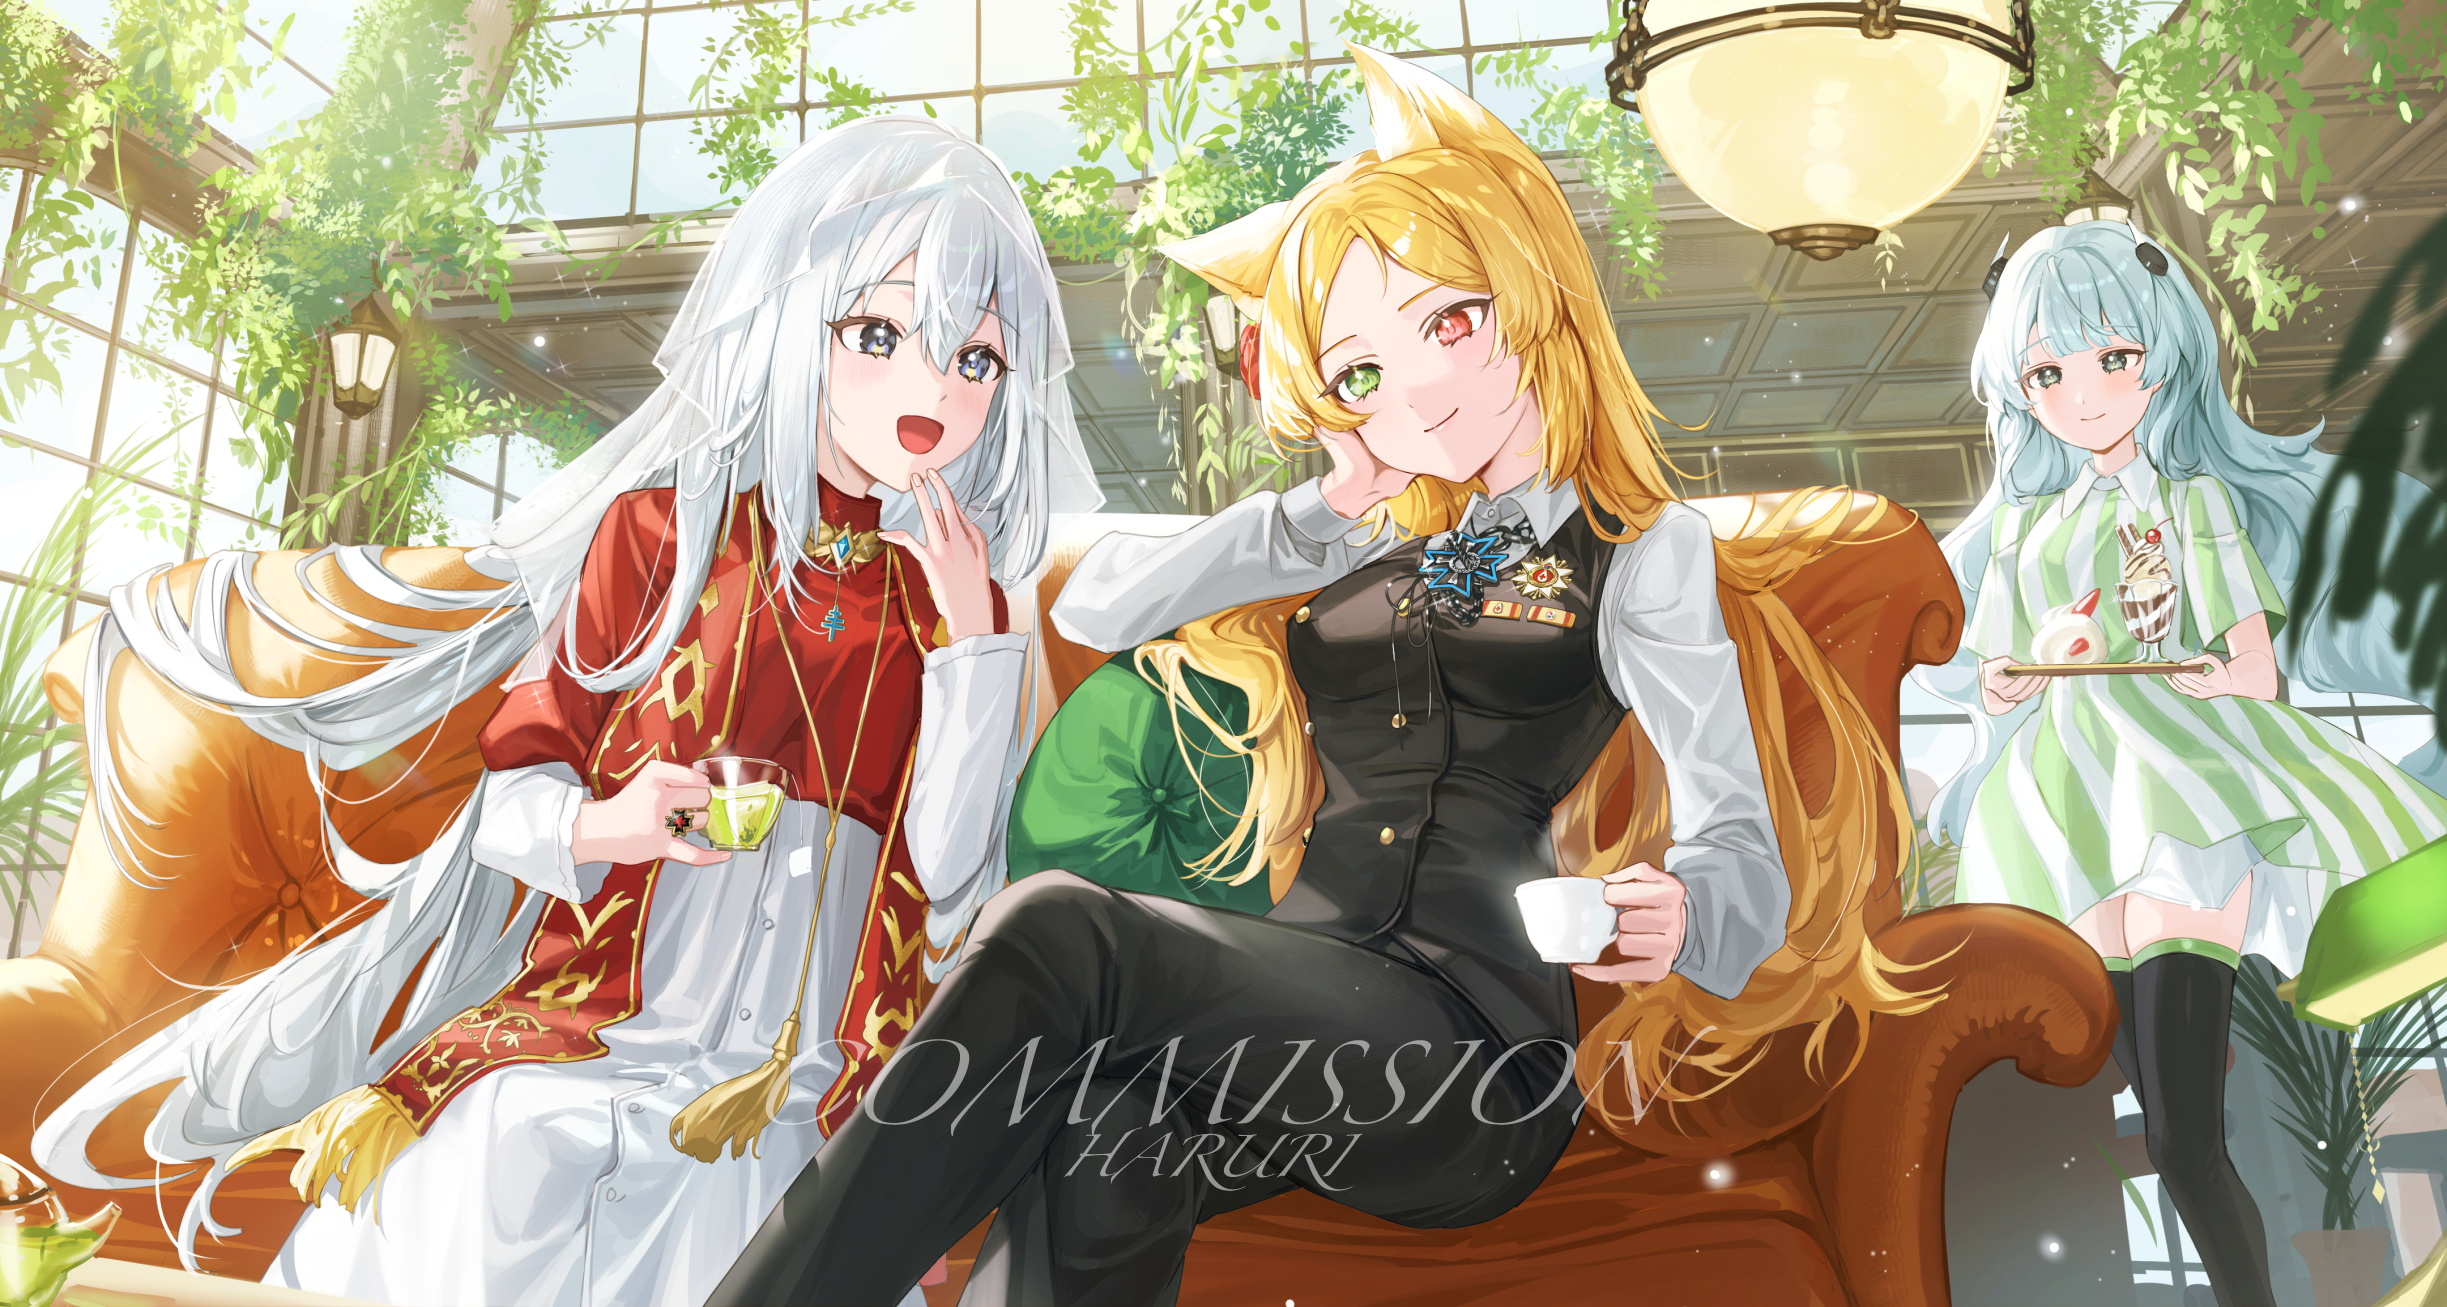 Anime 2447x1307 anime anime girls sitting heterochromia long hair smiling cup drink sunlight leaves sweets stockings open mouth uniform couch signature fox girl fox ears